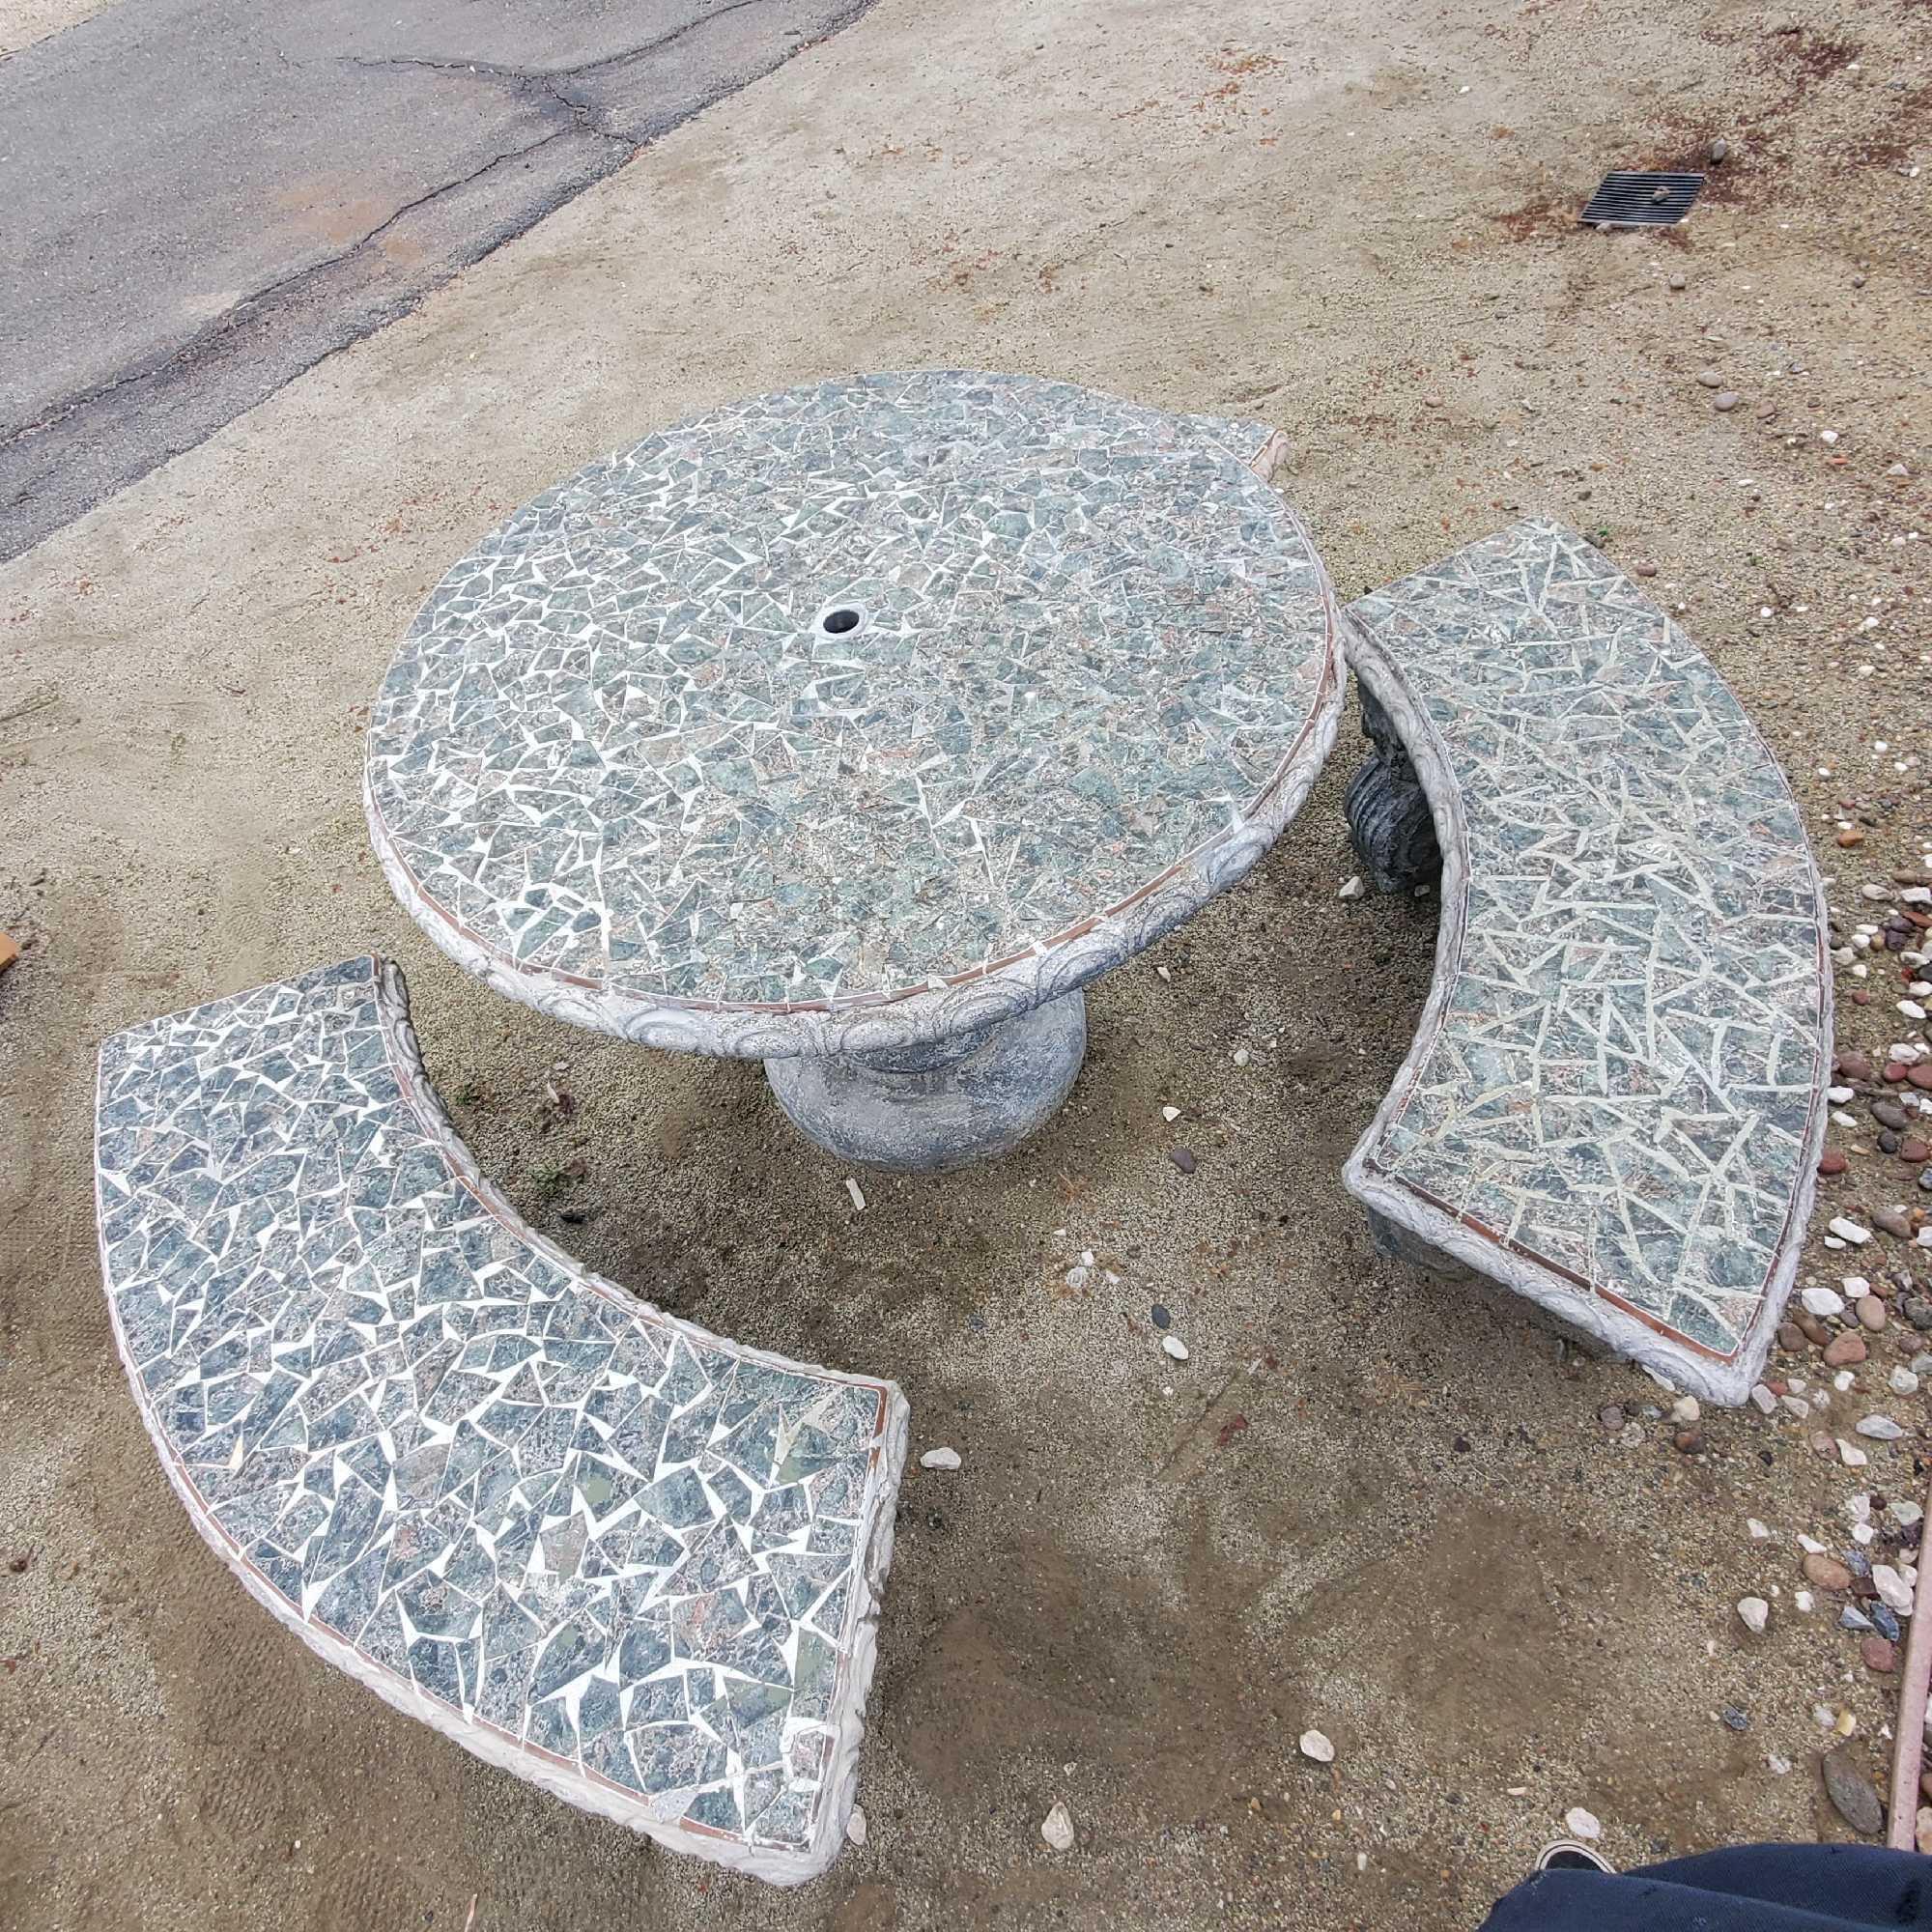 Cement mosaic stone outdoor table and three benches @ farm